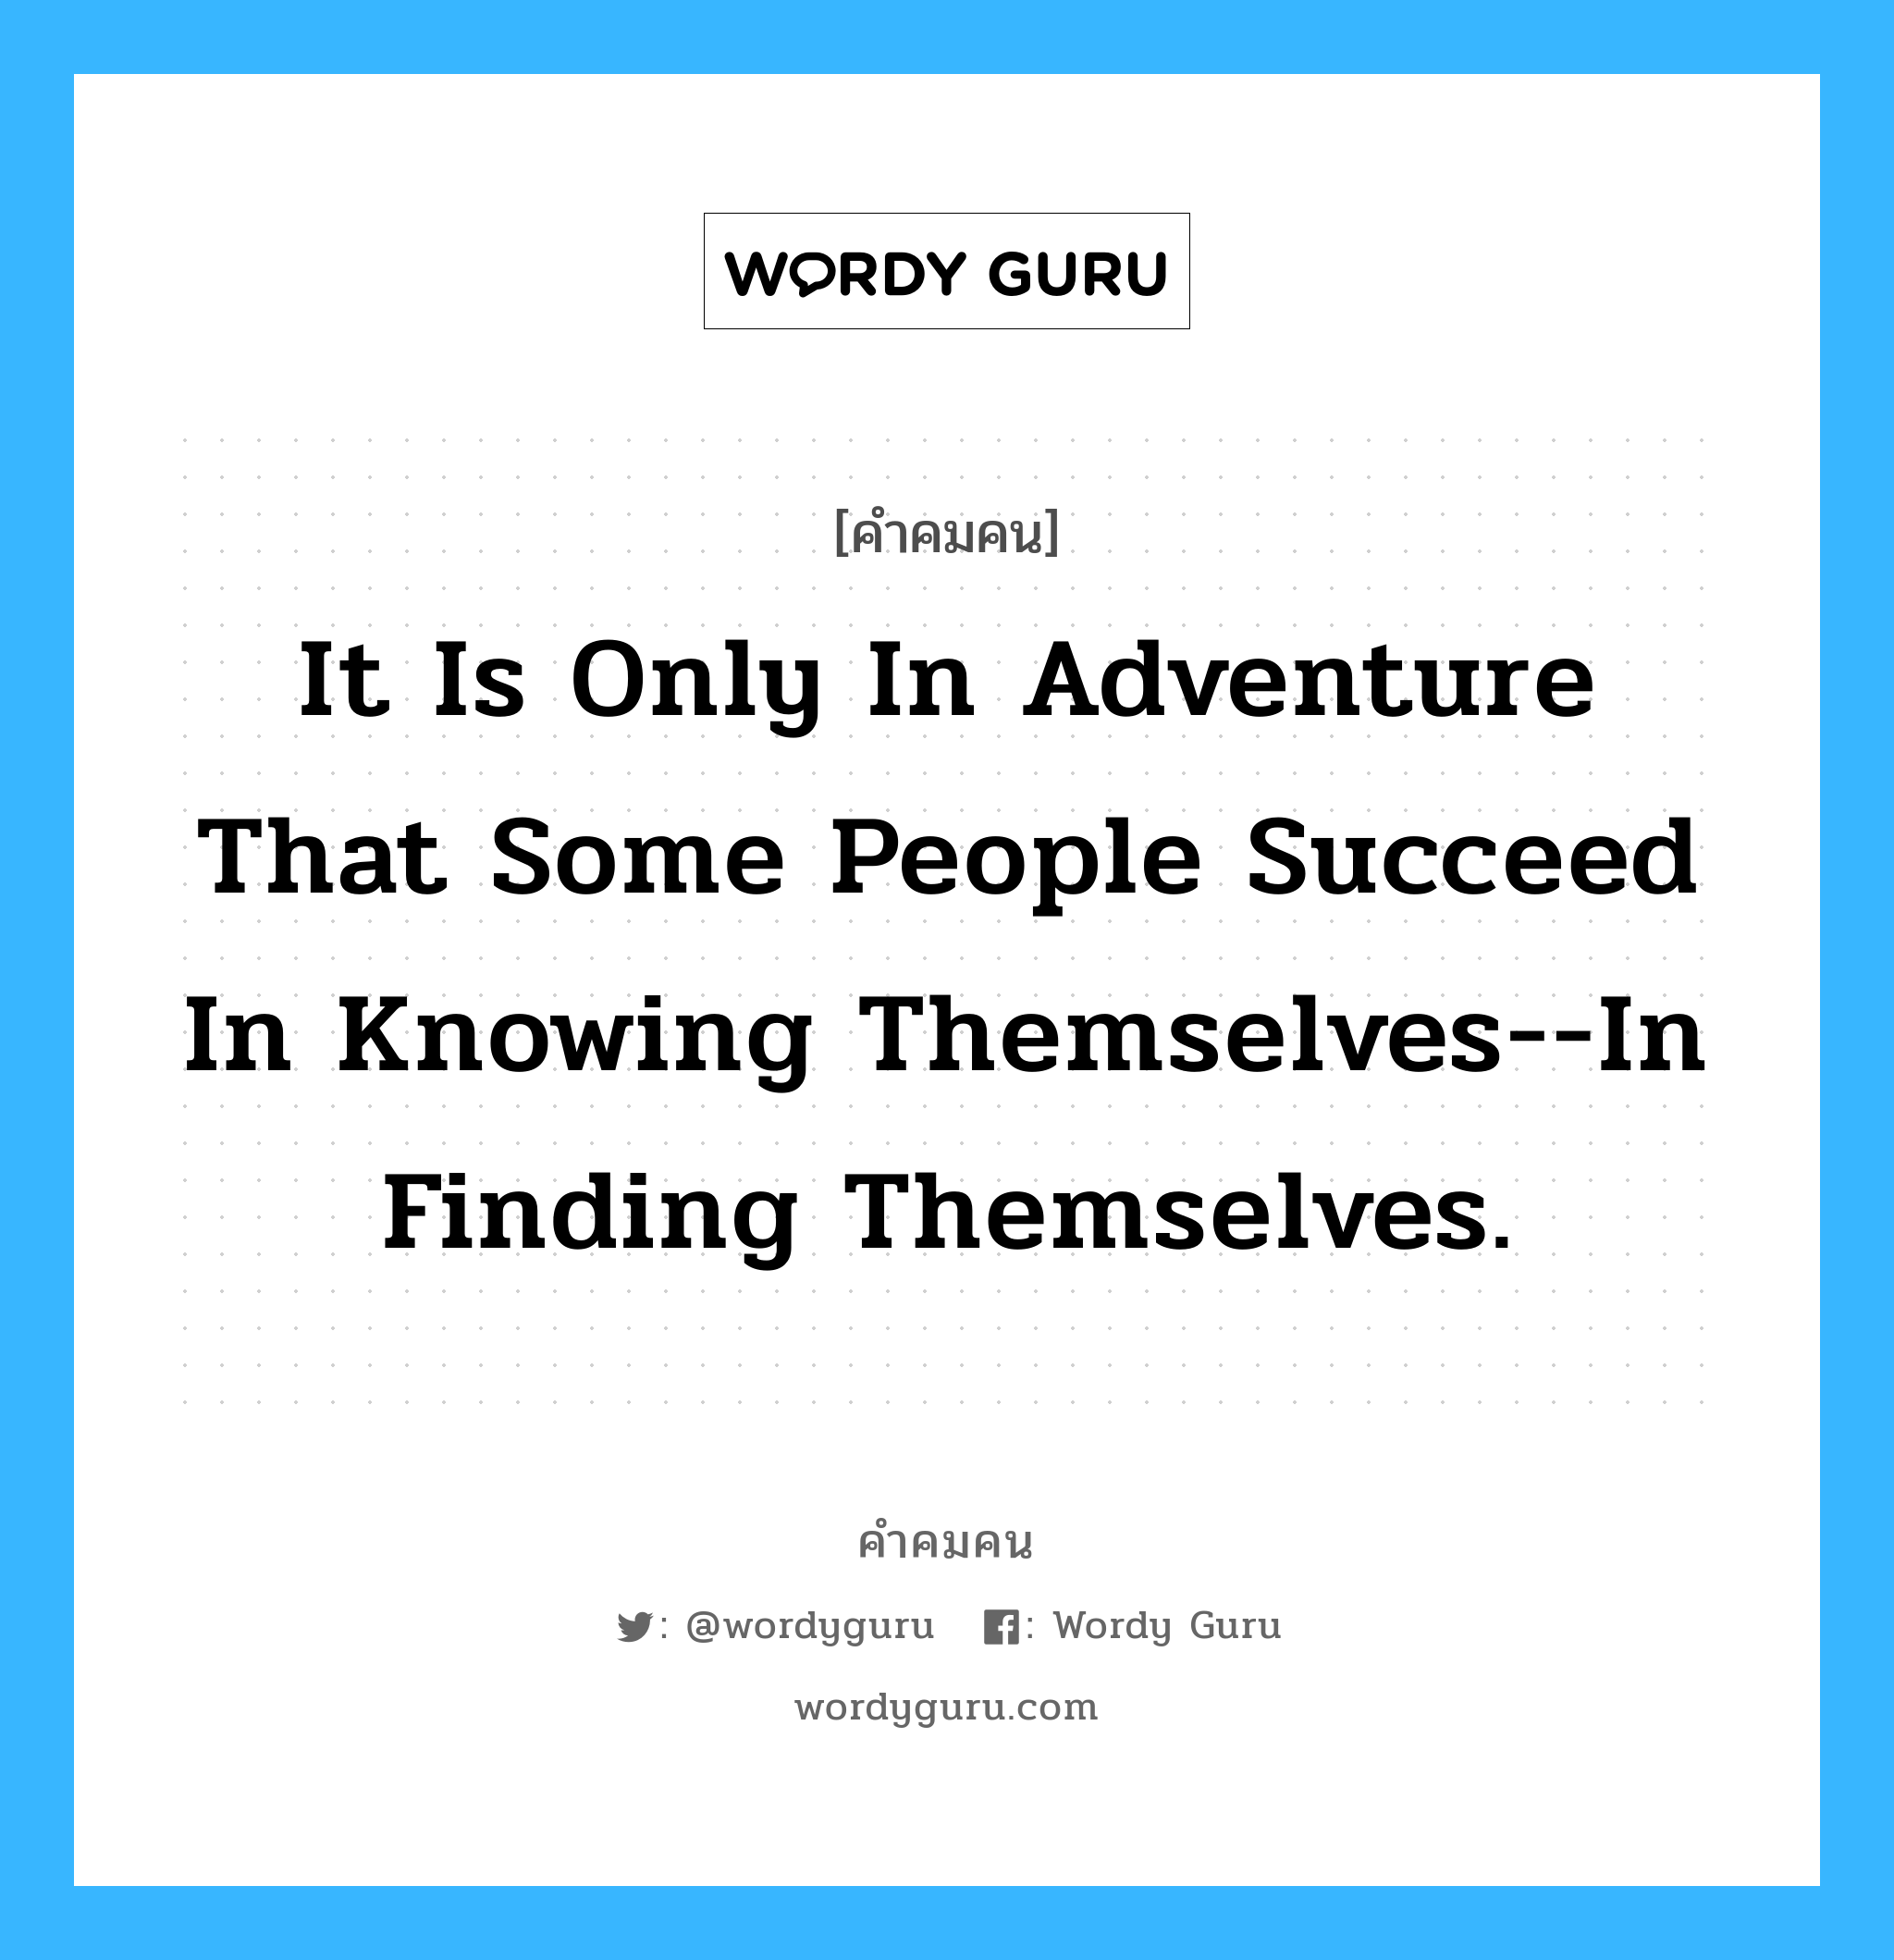 It is only in adventure that some people succeed in knowing themselves--in finding themselves., คำคมคน It is only in adventure that some people succeed in knowing themselves--in finding themselves. มีแต่ในการผจญภัยเท่านั้น ที่บางคนประสบความสำเร็จในการรู้จักตัวเอง นั้นคือ การค้นพบตัวเอง Andr Gide หมวด Andr Gide